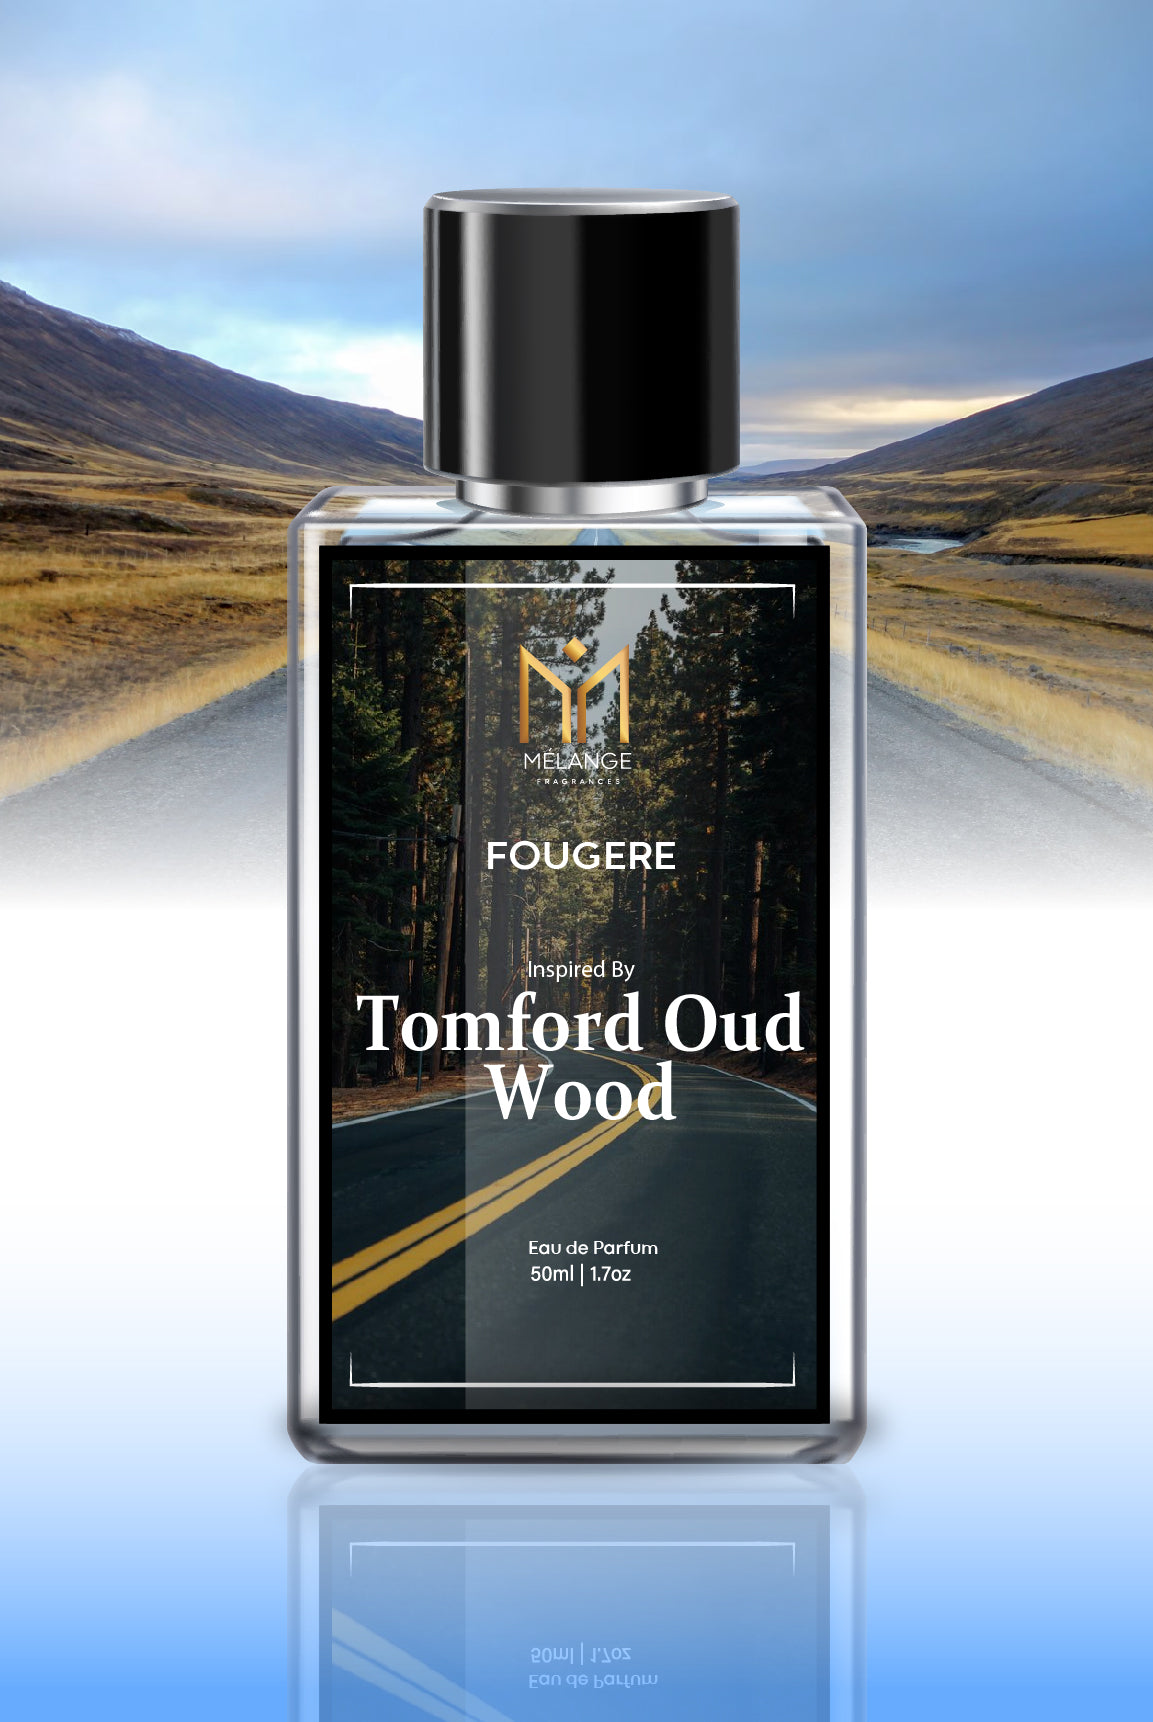 FOUGERE- Inspired by Tomford Oud Wood